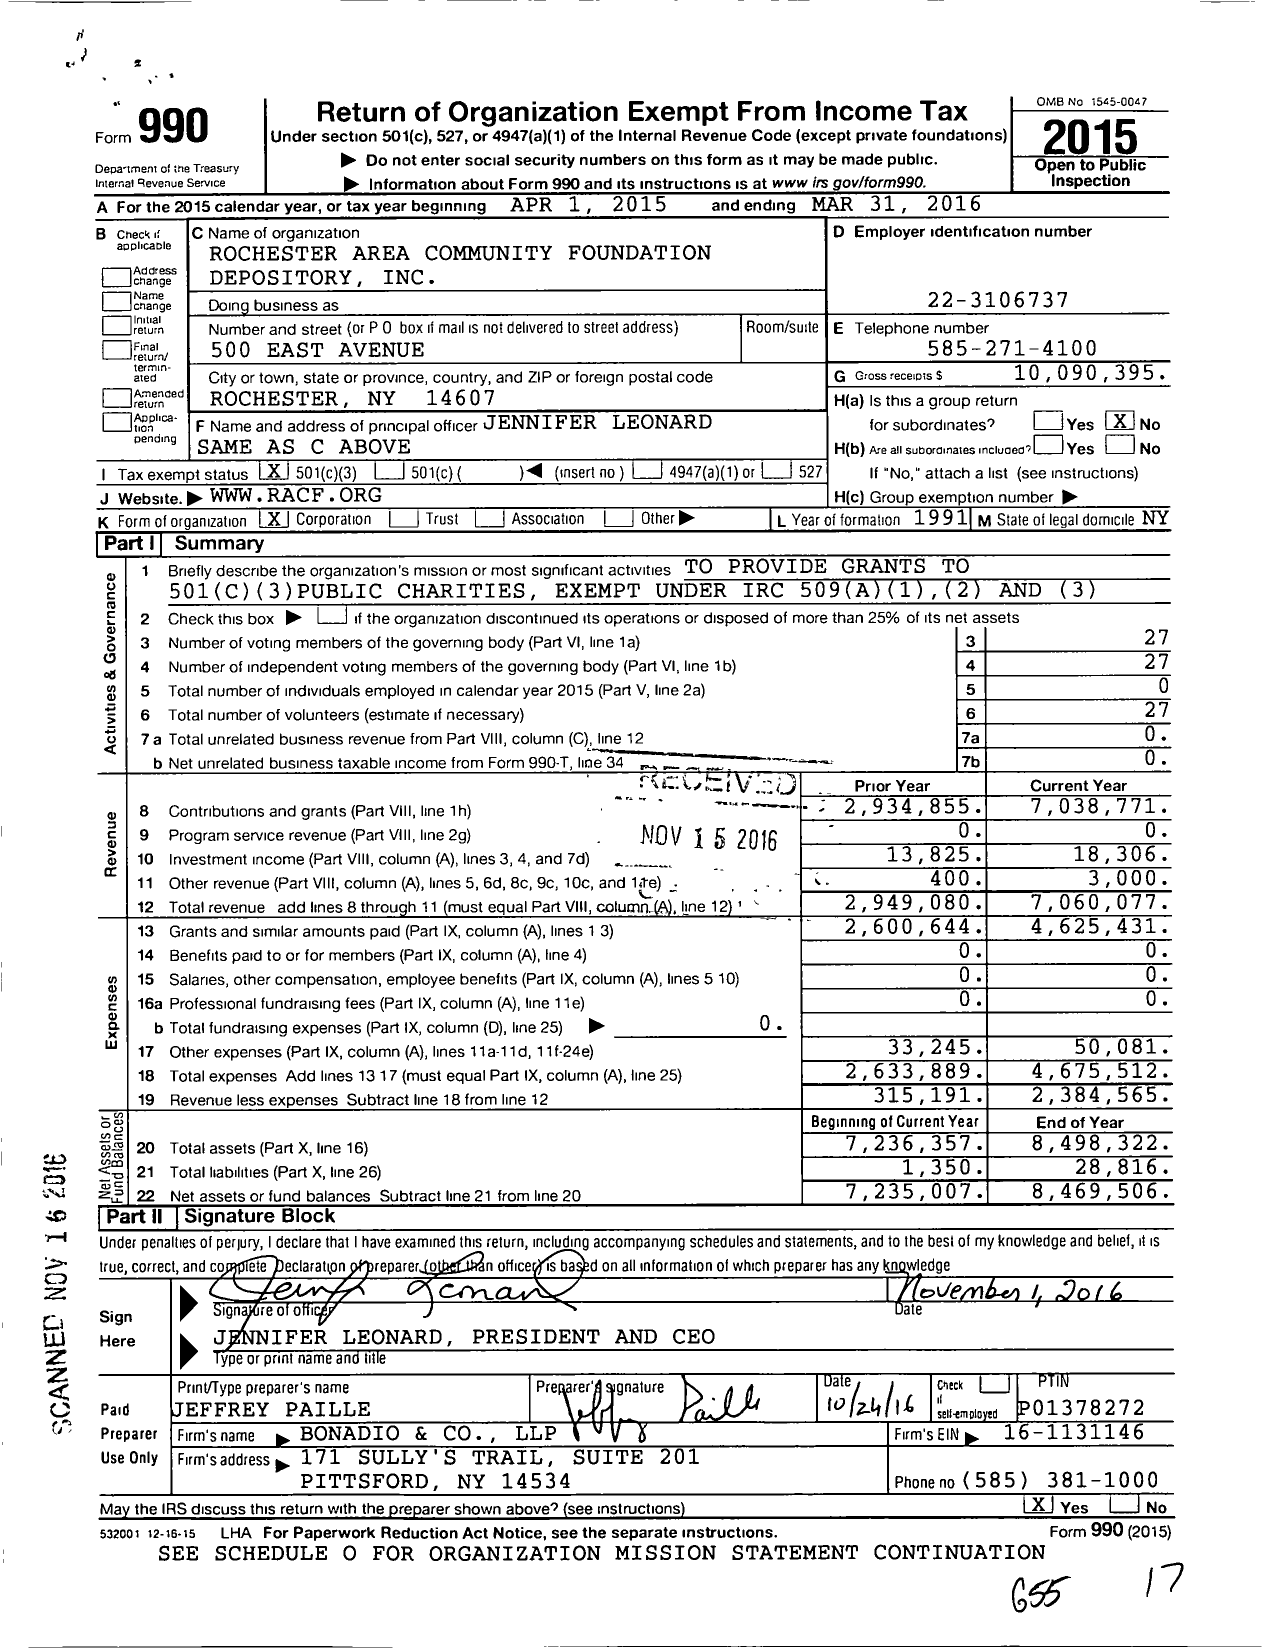 Image of first page of 2015 Form 990 for Rochester Area Community Foundation Depository